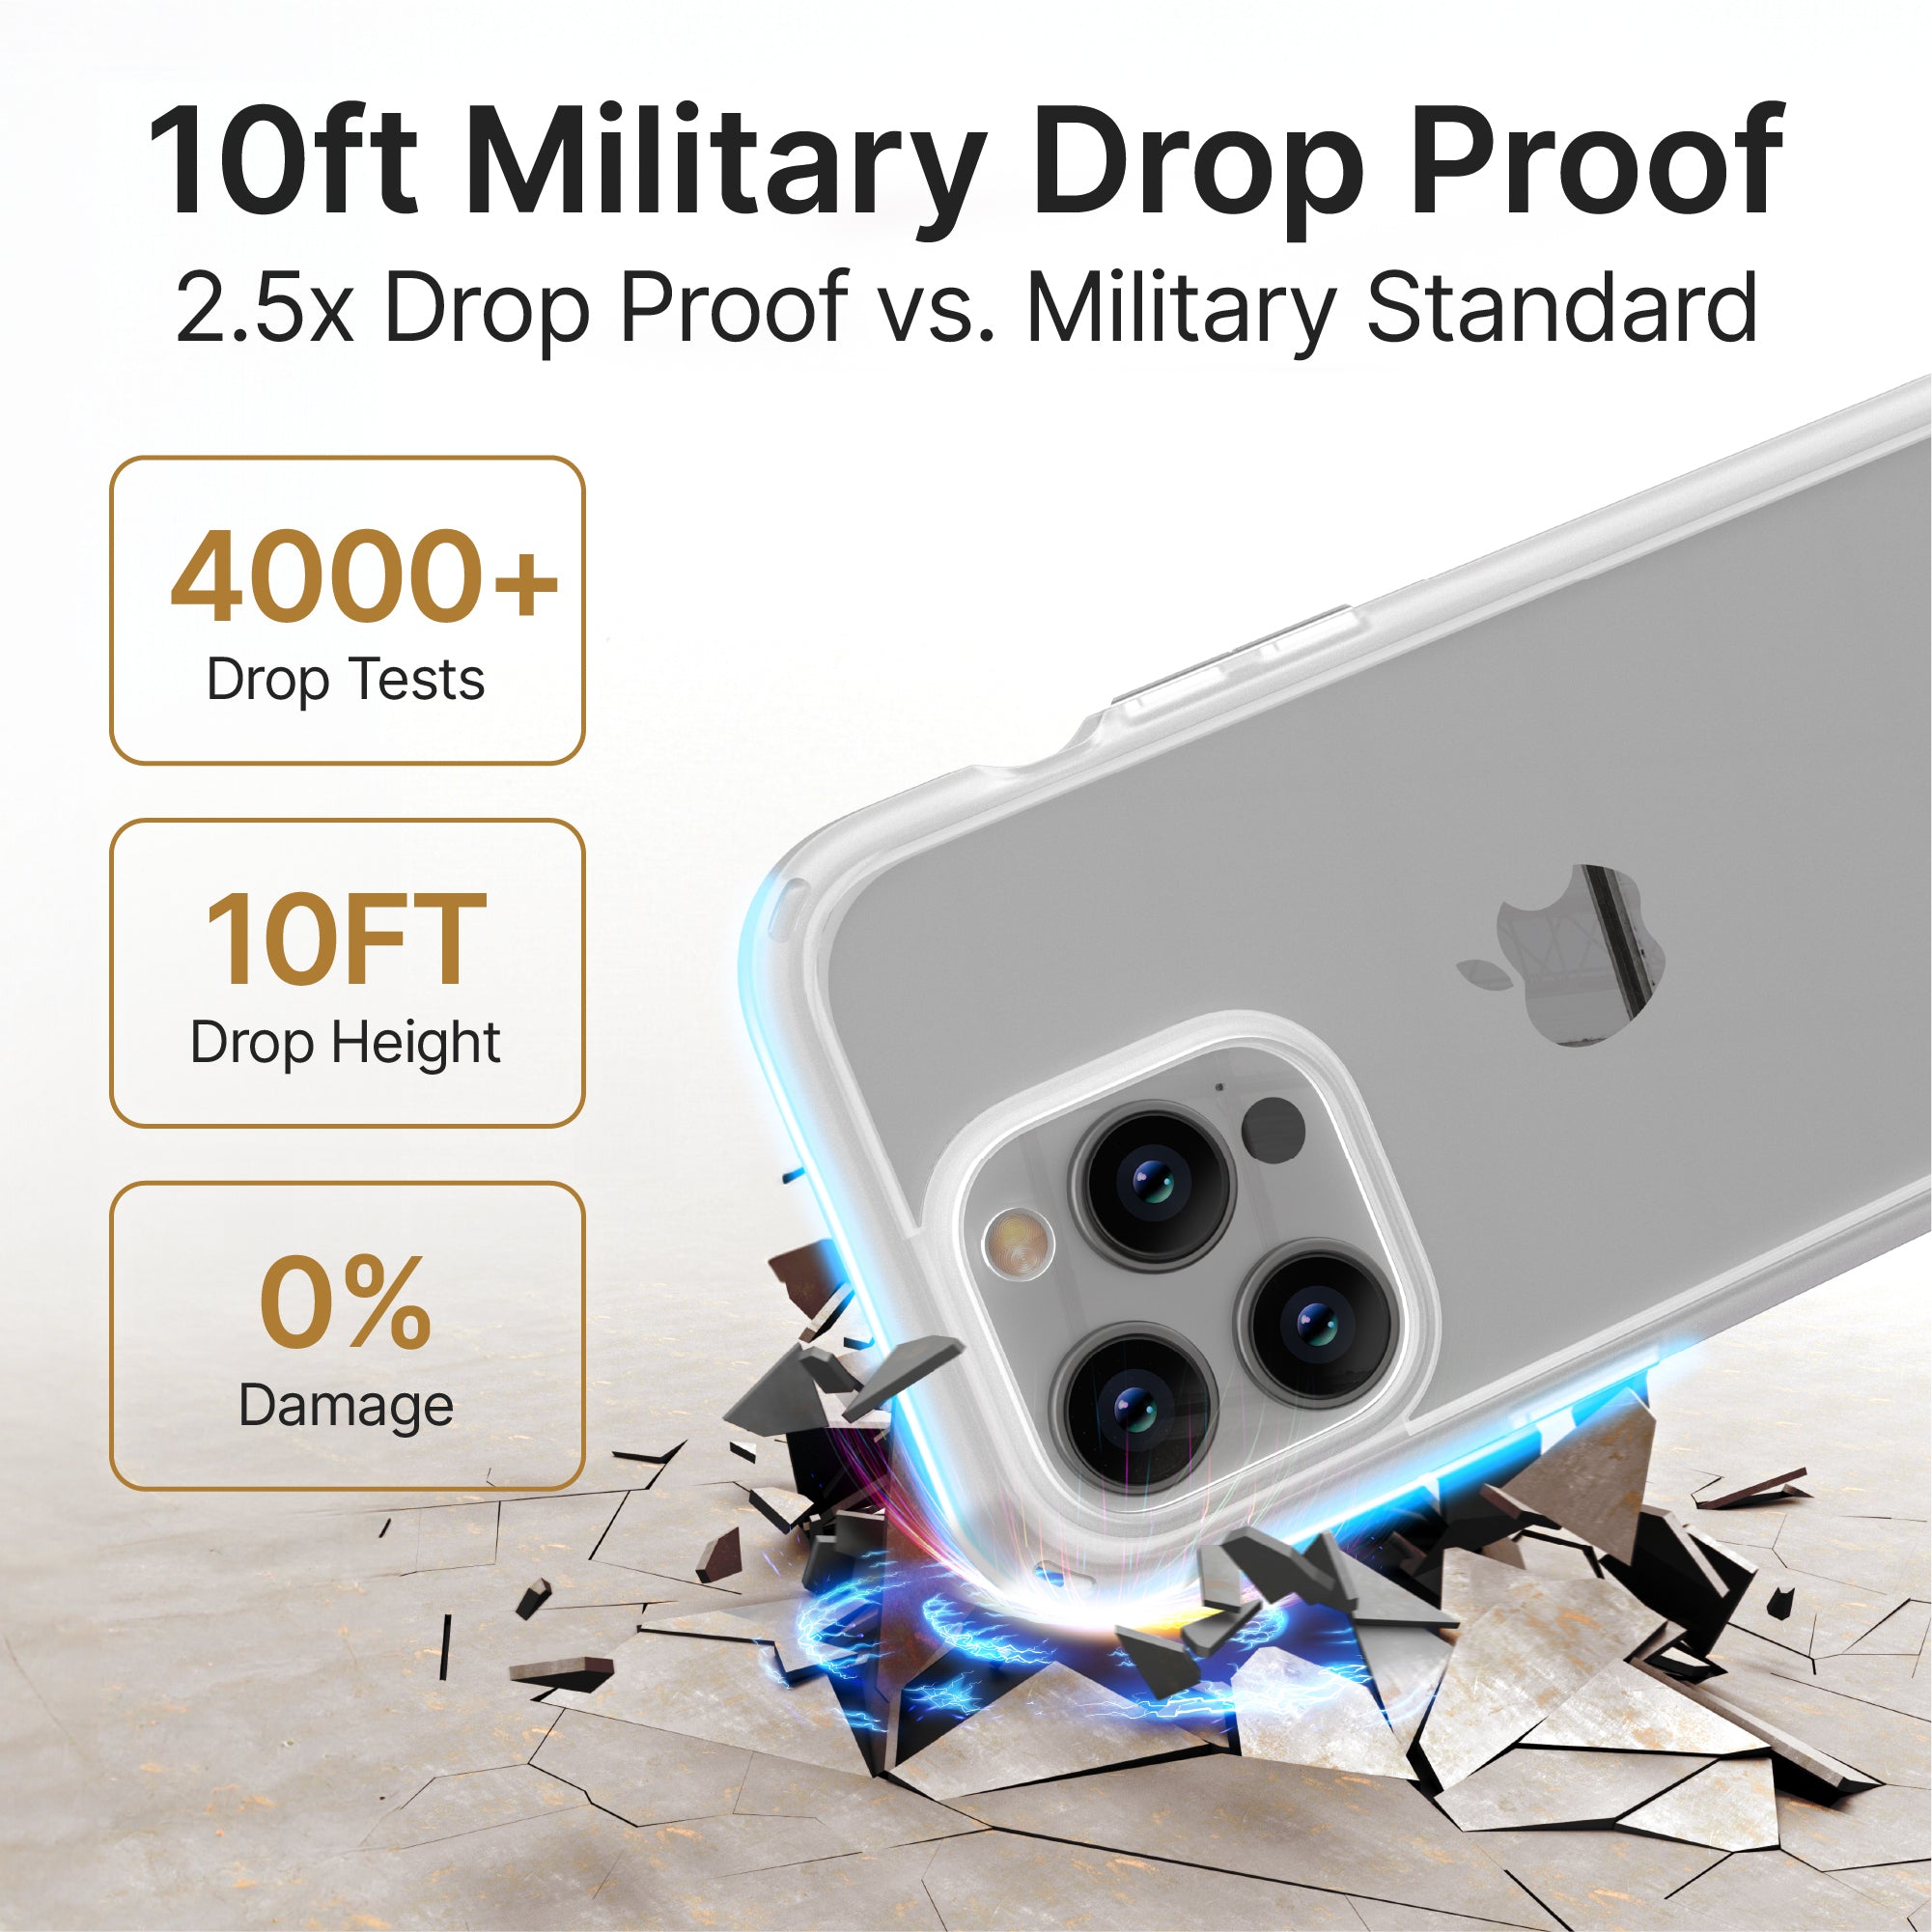 Catalyst iphone 15 series influence case iphone 15 pro max in clear colorway showing the durability of the case text reads 10ft military drop proof 2.5 x drop proof vs. military standard 4000+ drop tests 10ft drop height 0% damage